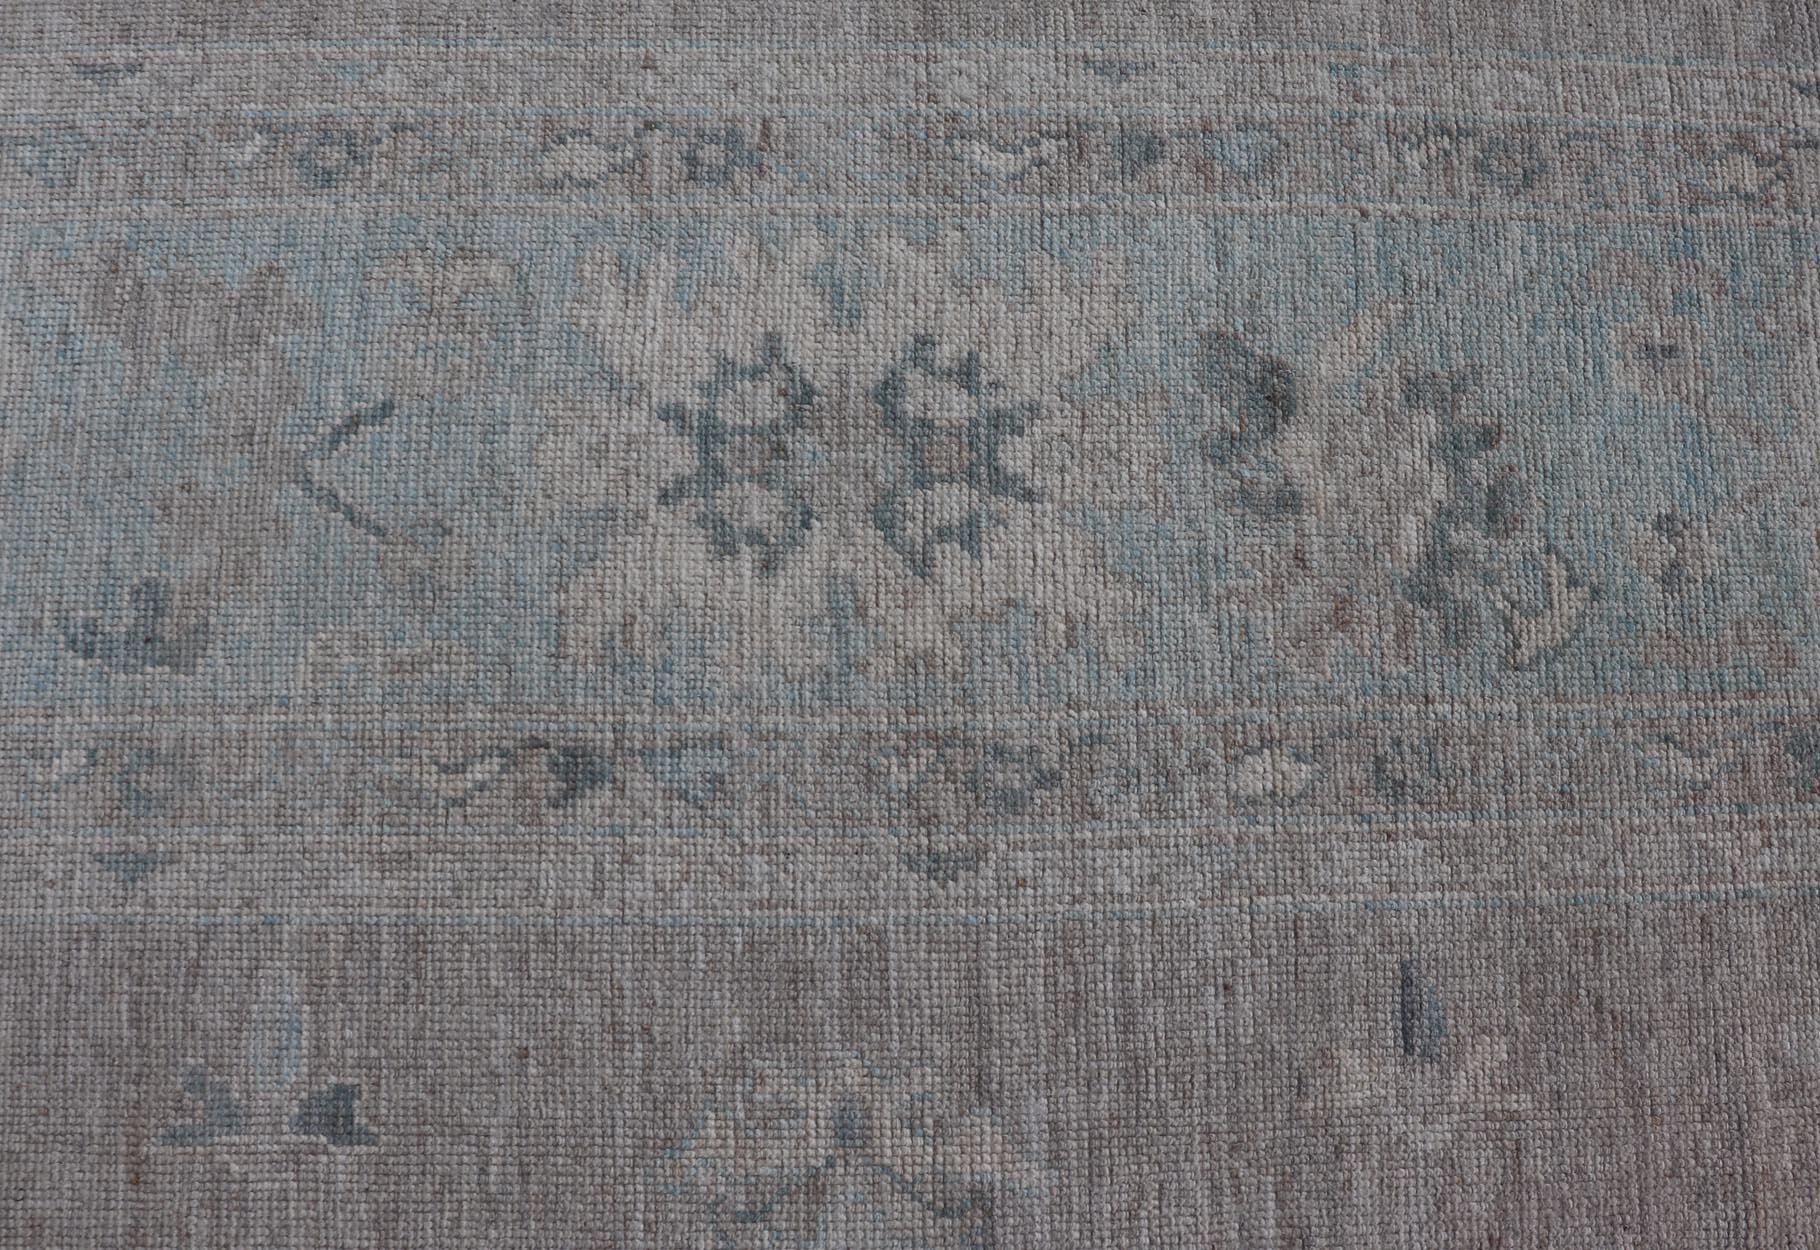 Large Modern Oushak with Floral Motifs in Wheat, Mushroom, Grey & Light Blue 10